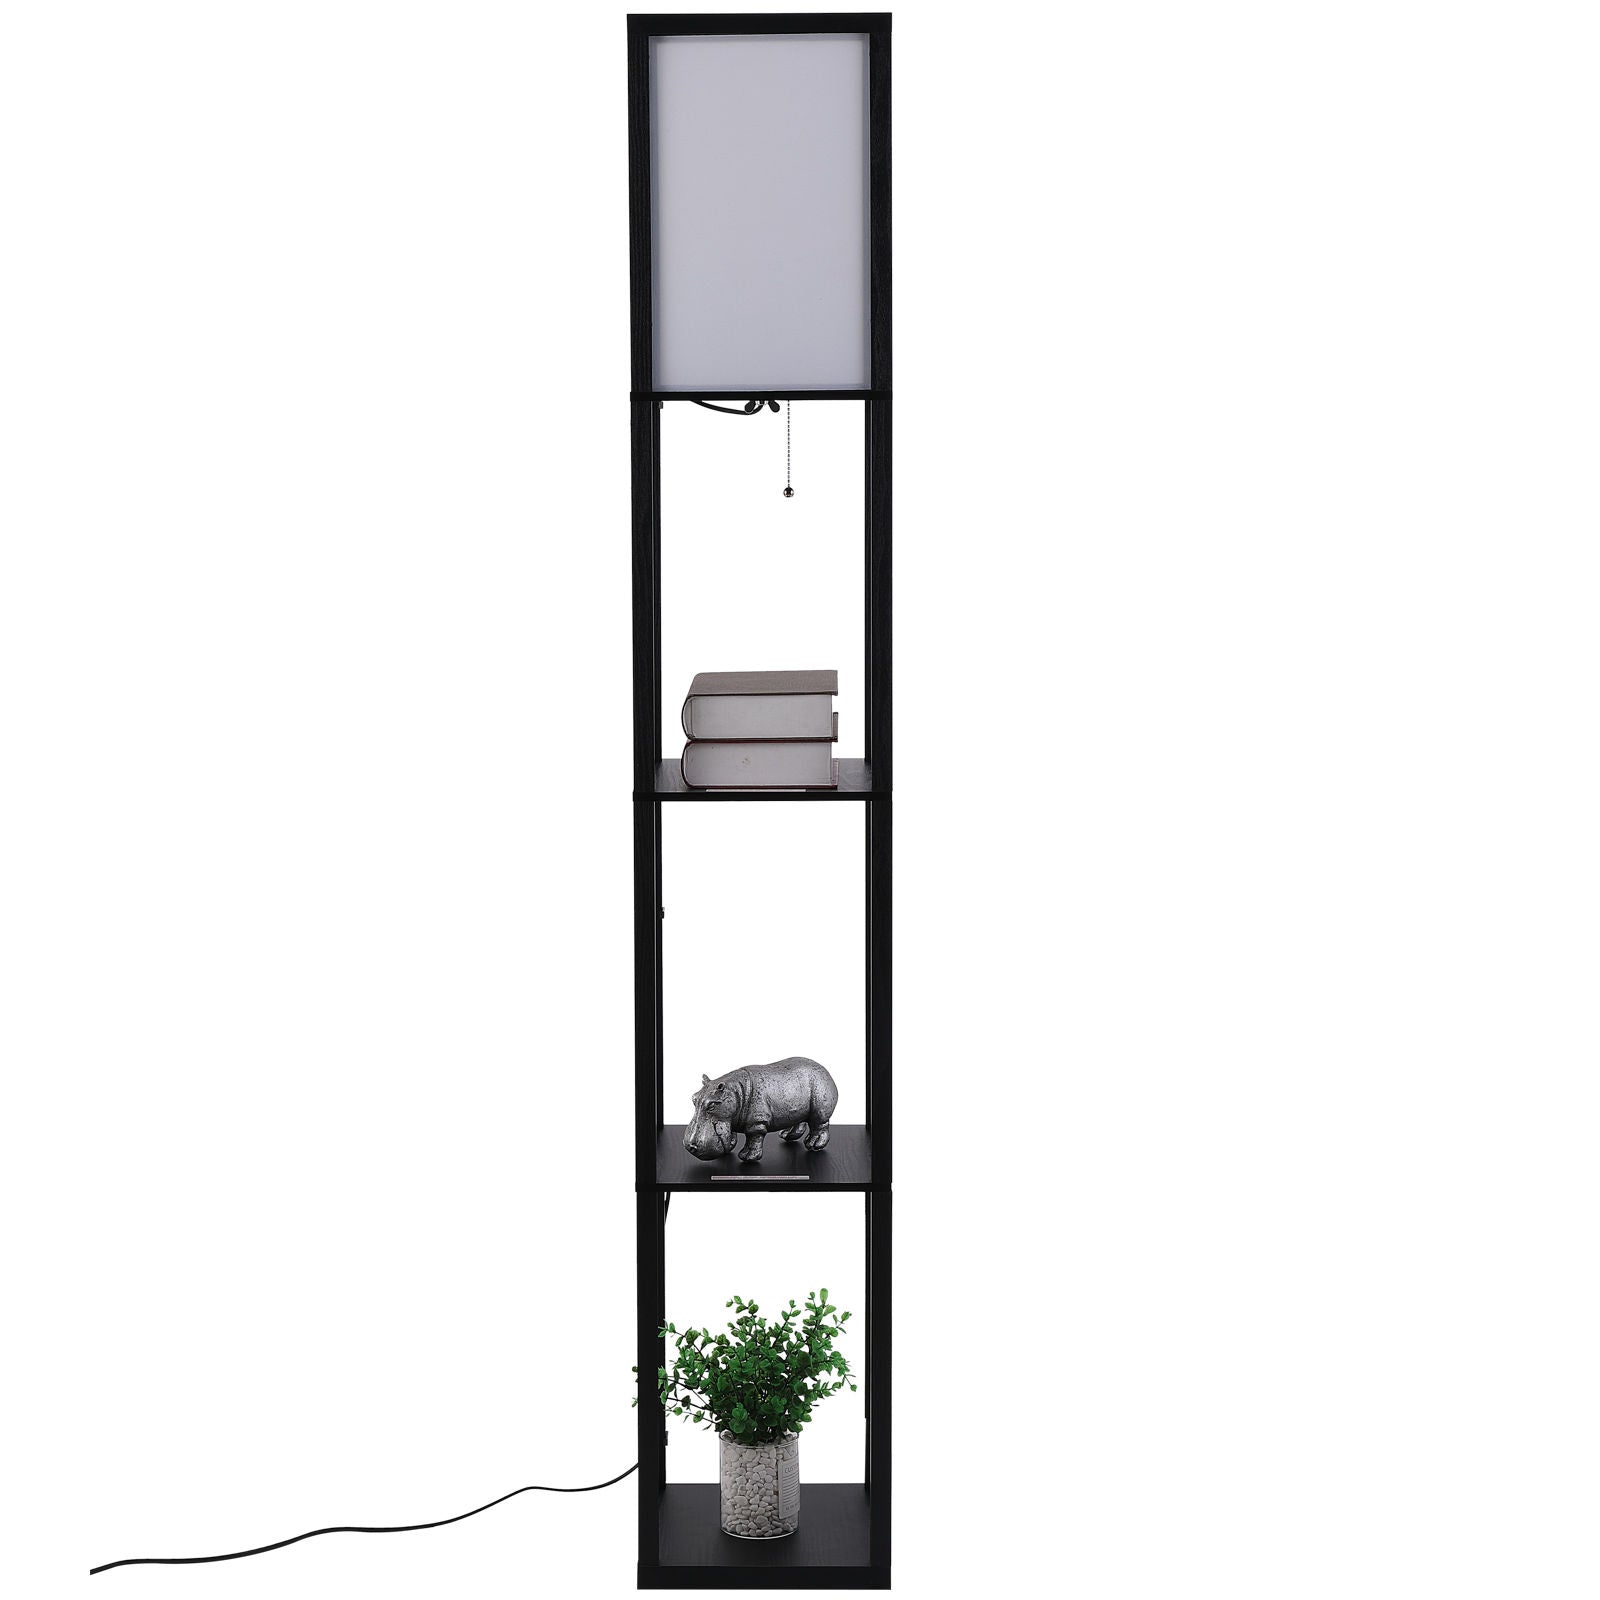 Nancy's Lagarto Floor Lamp with E27 fitting for living room/bedroom Wood Black 26 x 26 x 160 cm (without lamp)